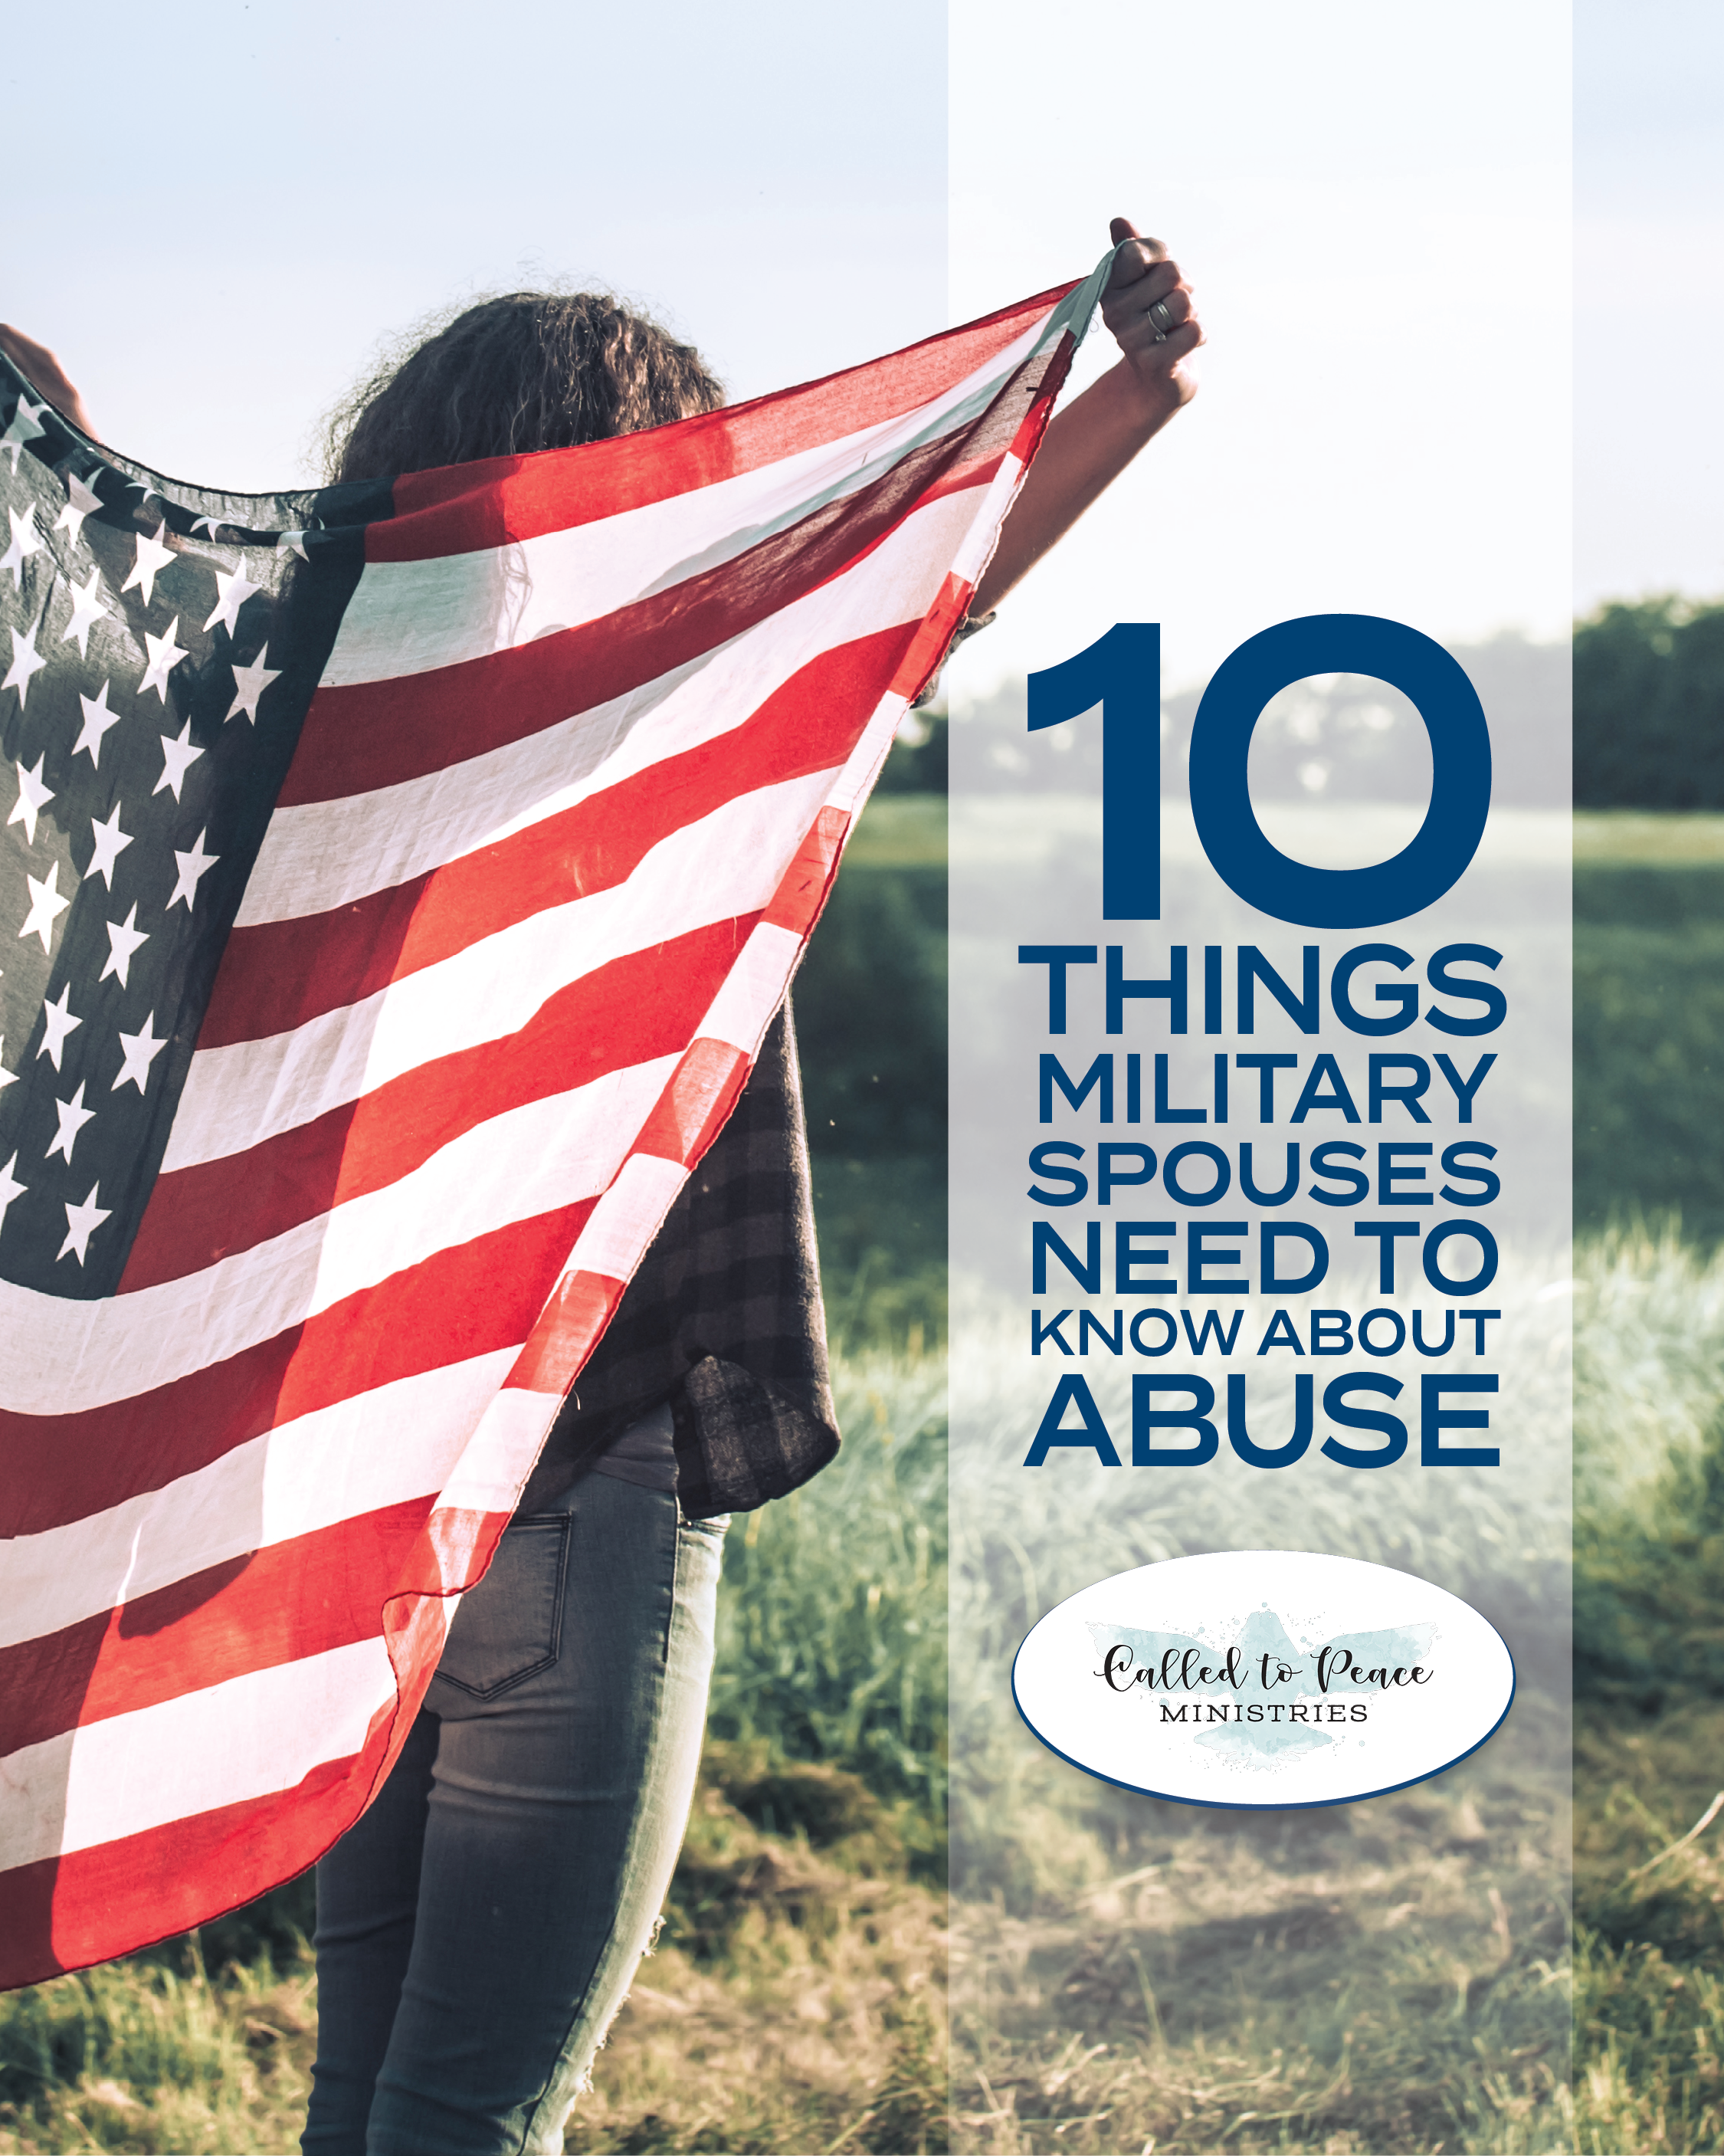 10 Things You Need to Know About Domestic Abuse in the Military